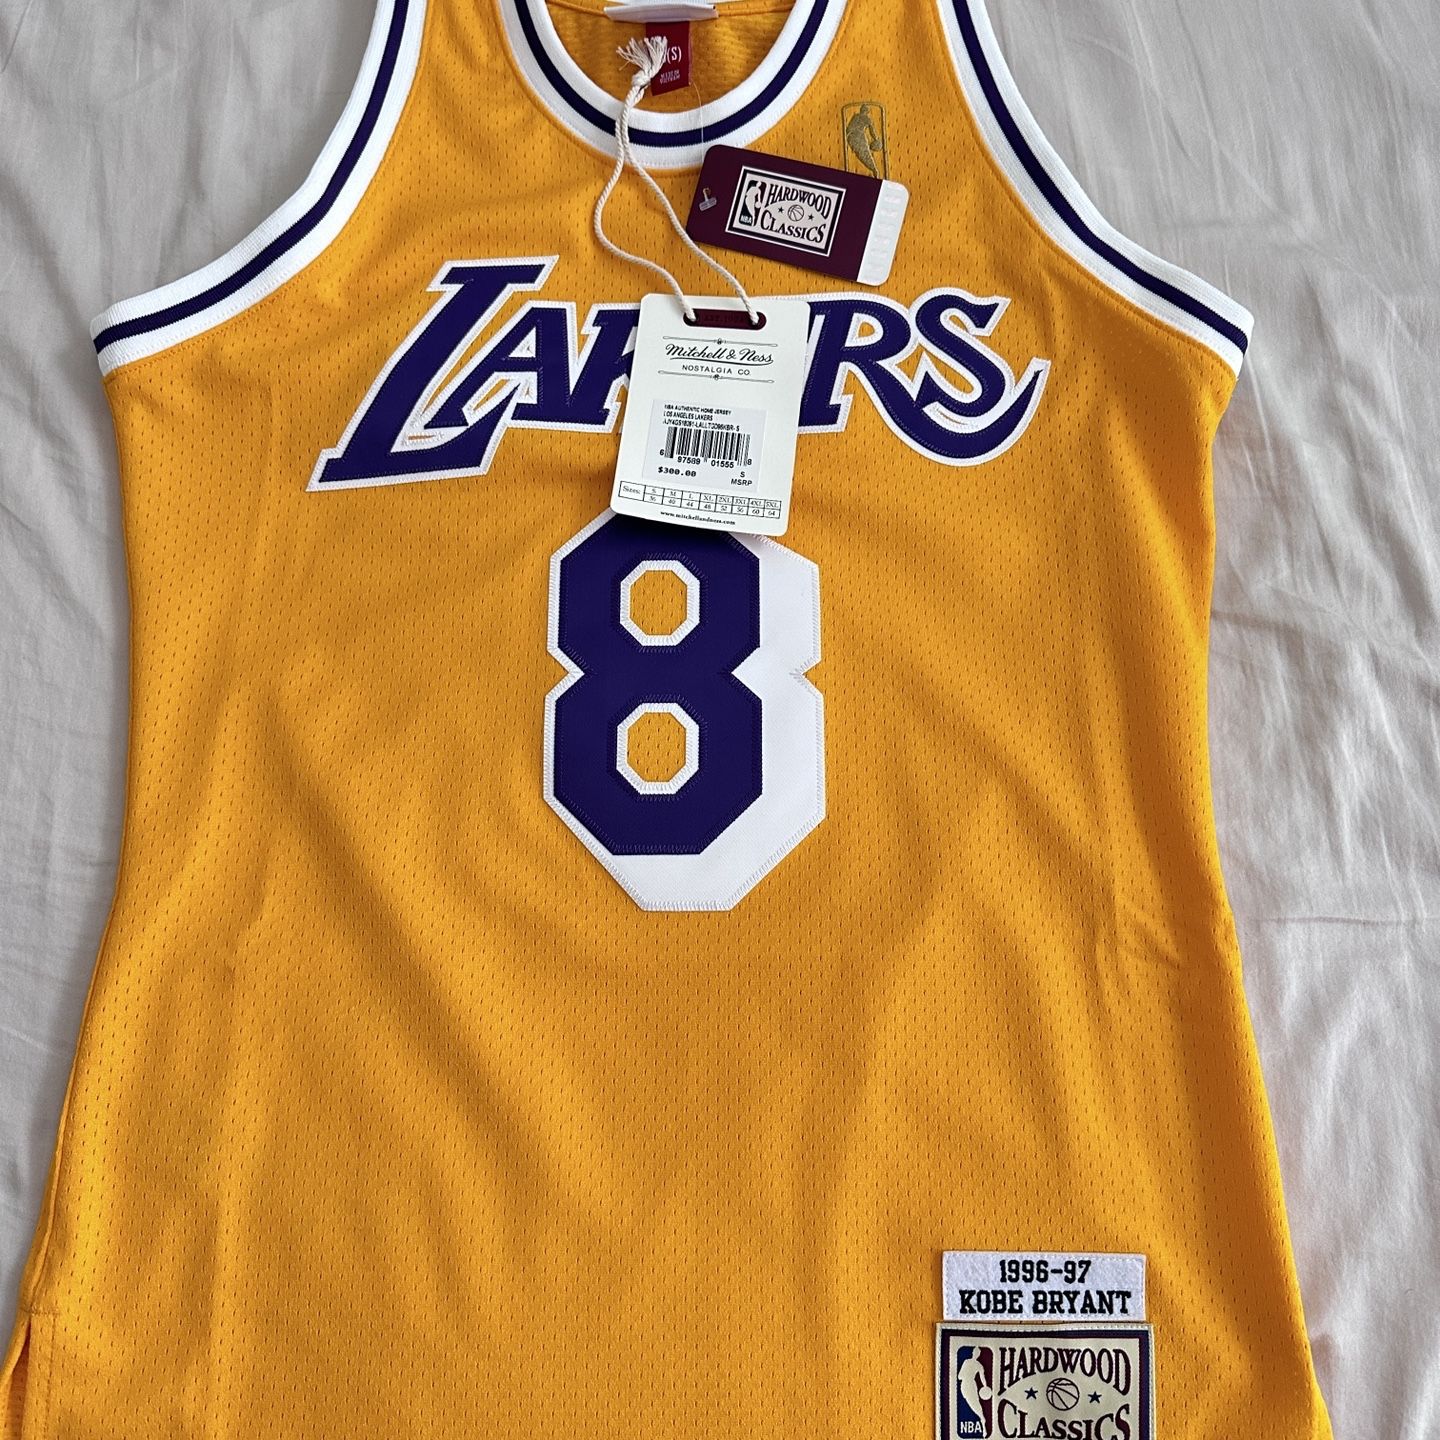 Buy NBA LOS ANGELES LAKERS 1996-97 KOBE BRYANT #8 AUTHENTIC JERSEY for N/A  0.0 | Kickz-DE-AT-INT